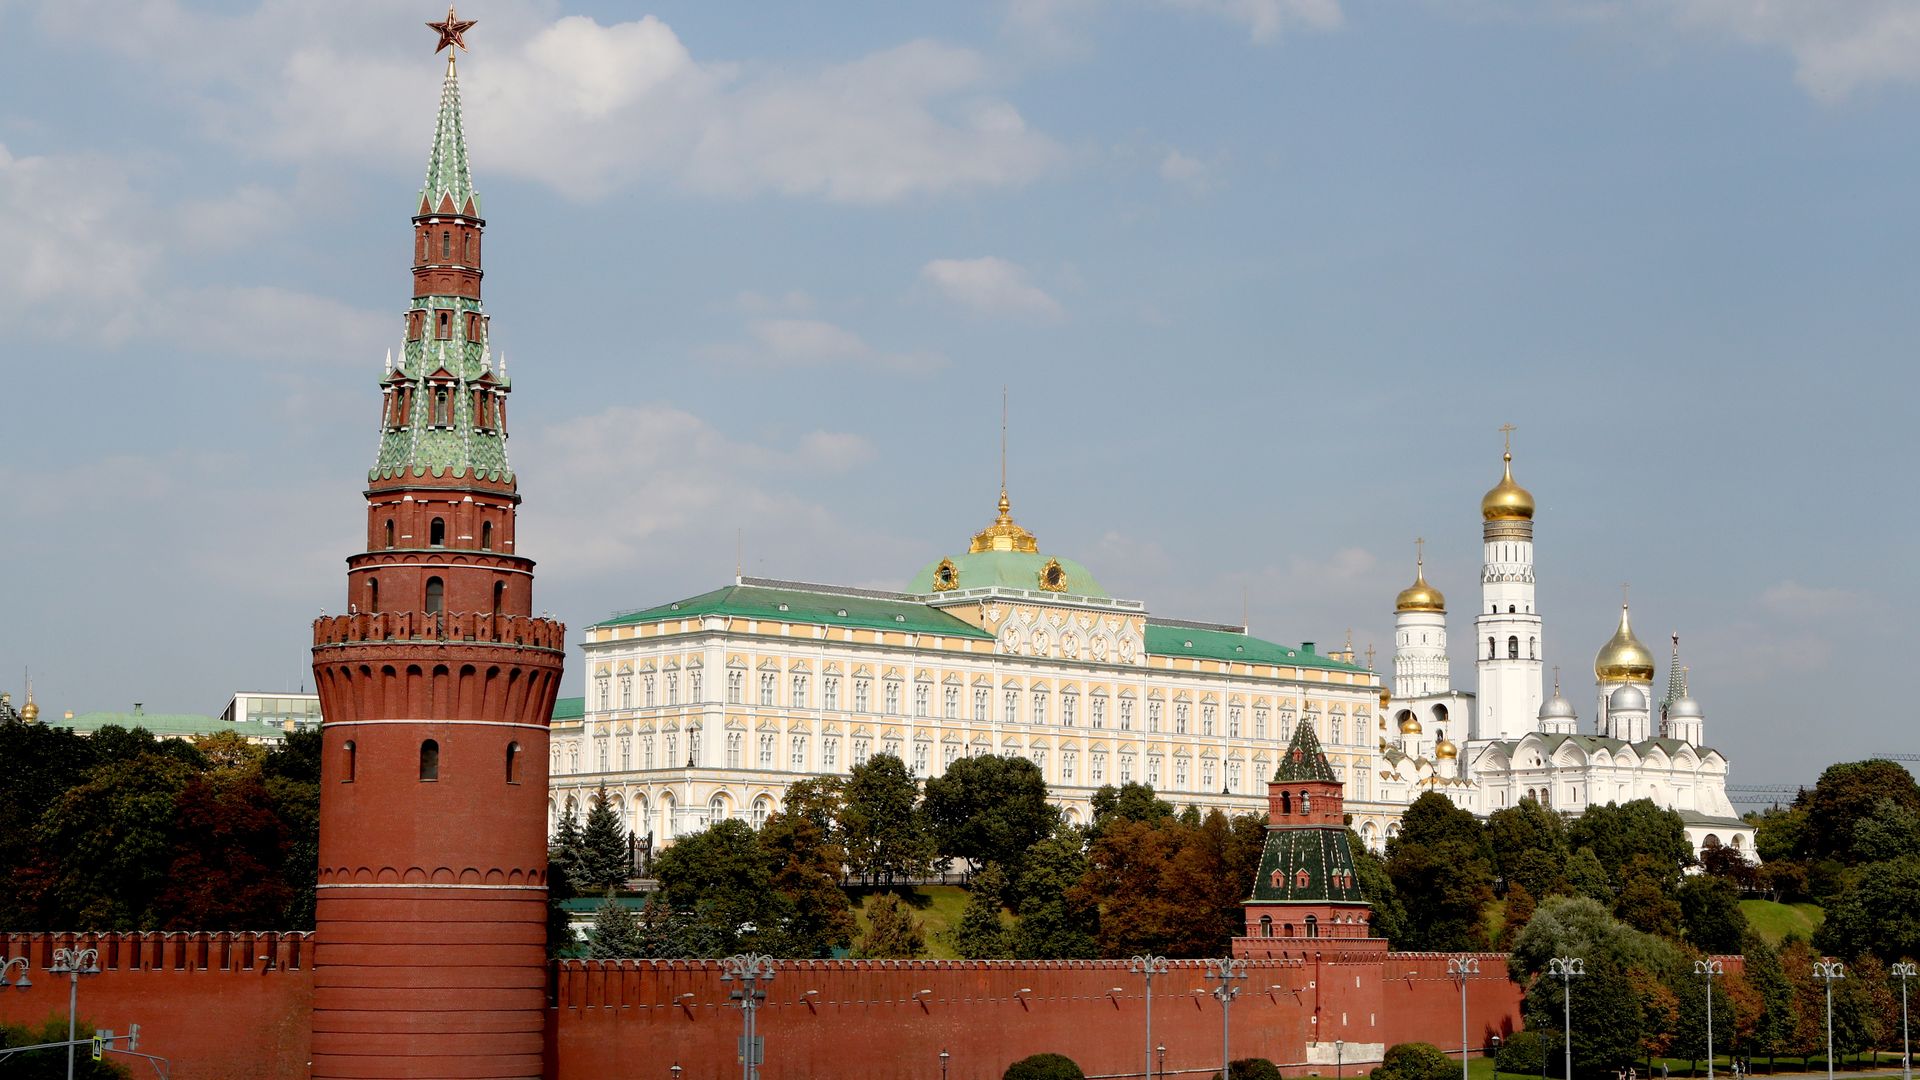 view of the Kremlin compound